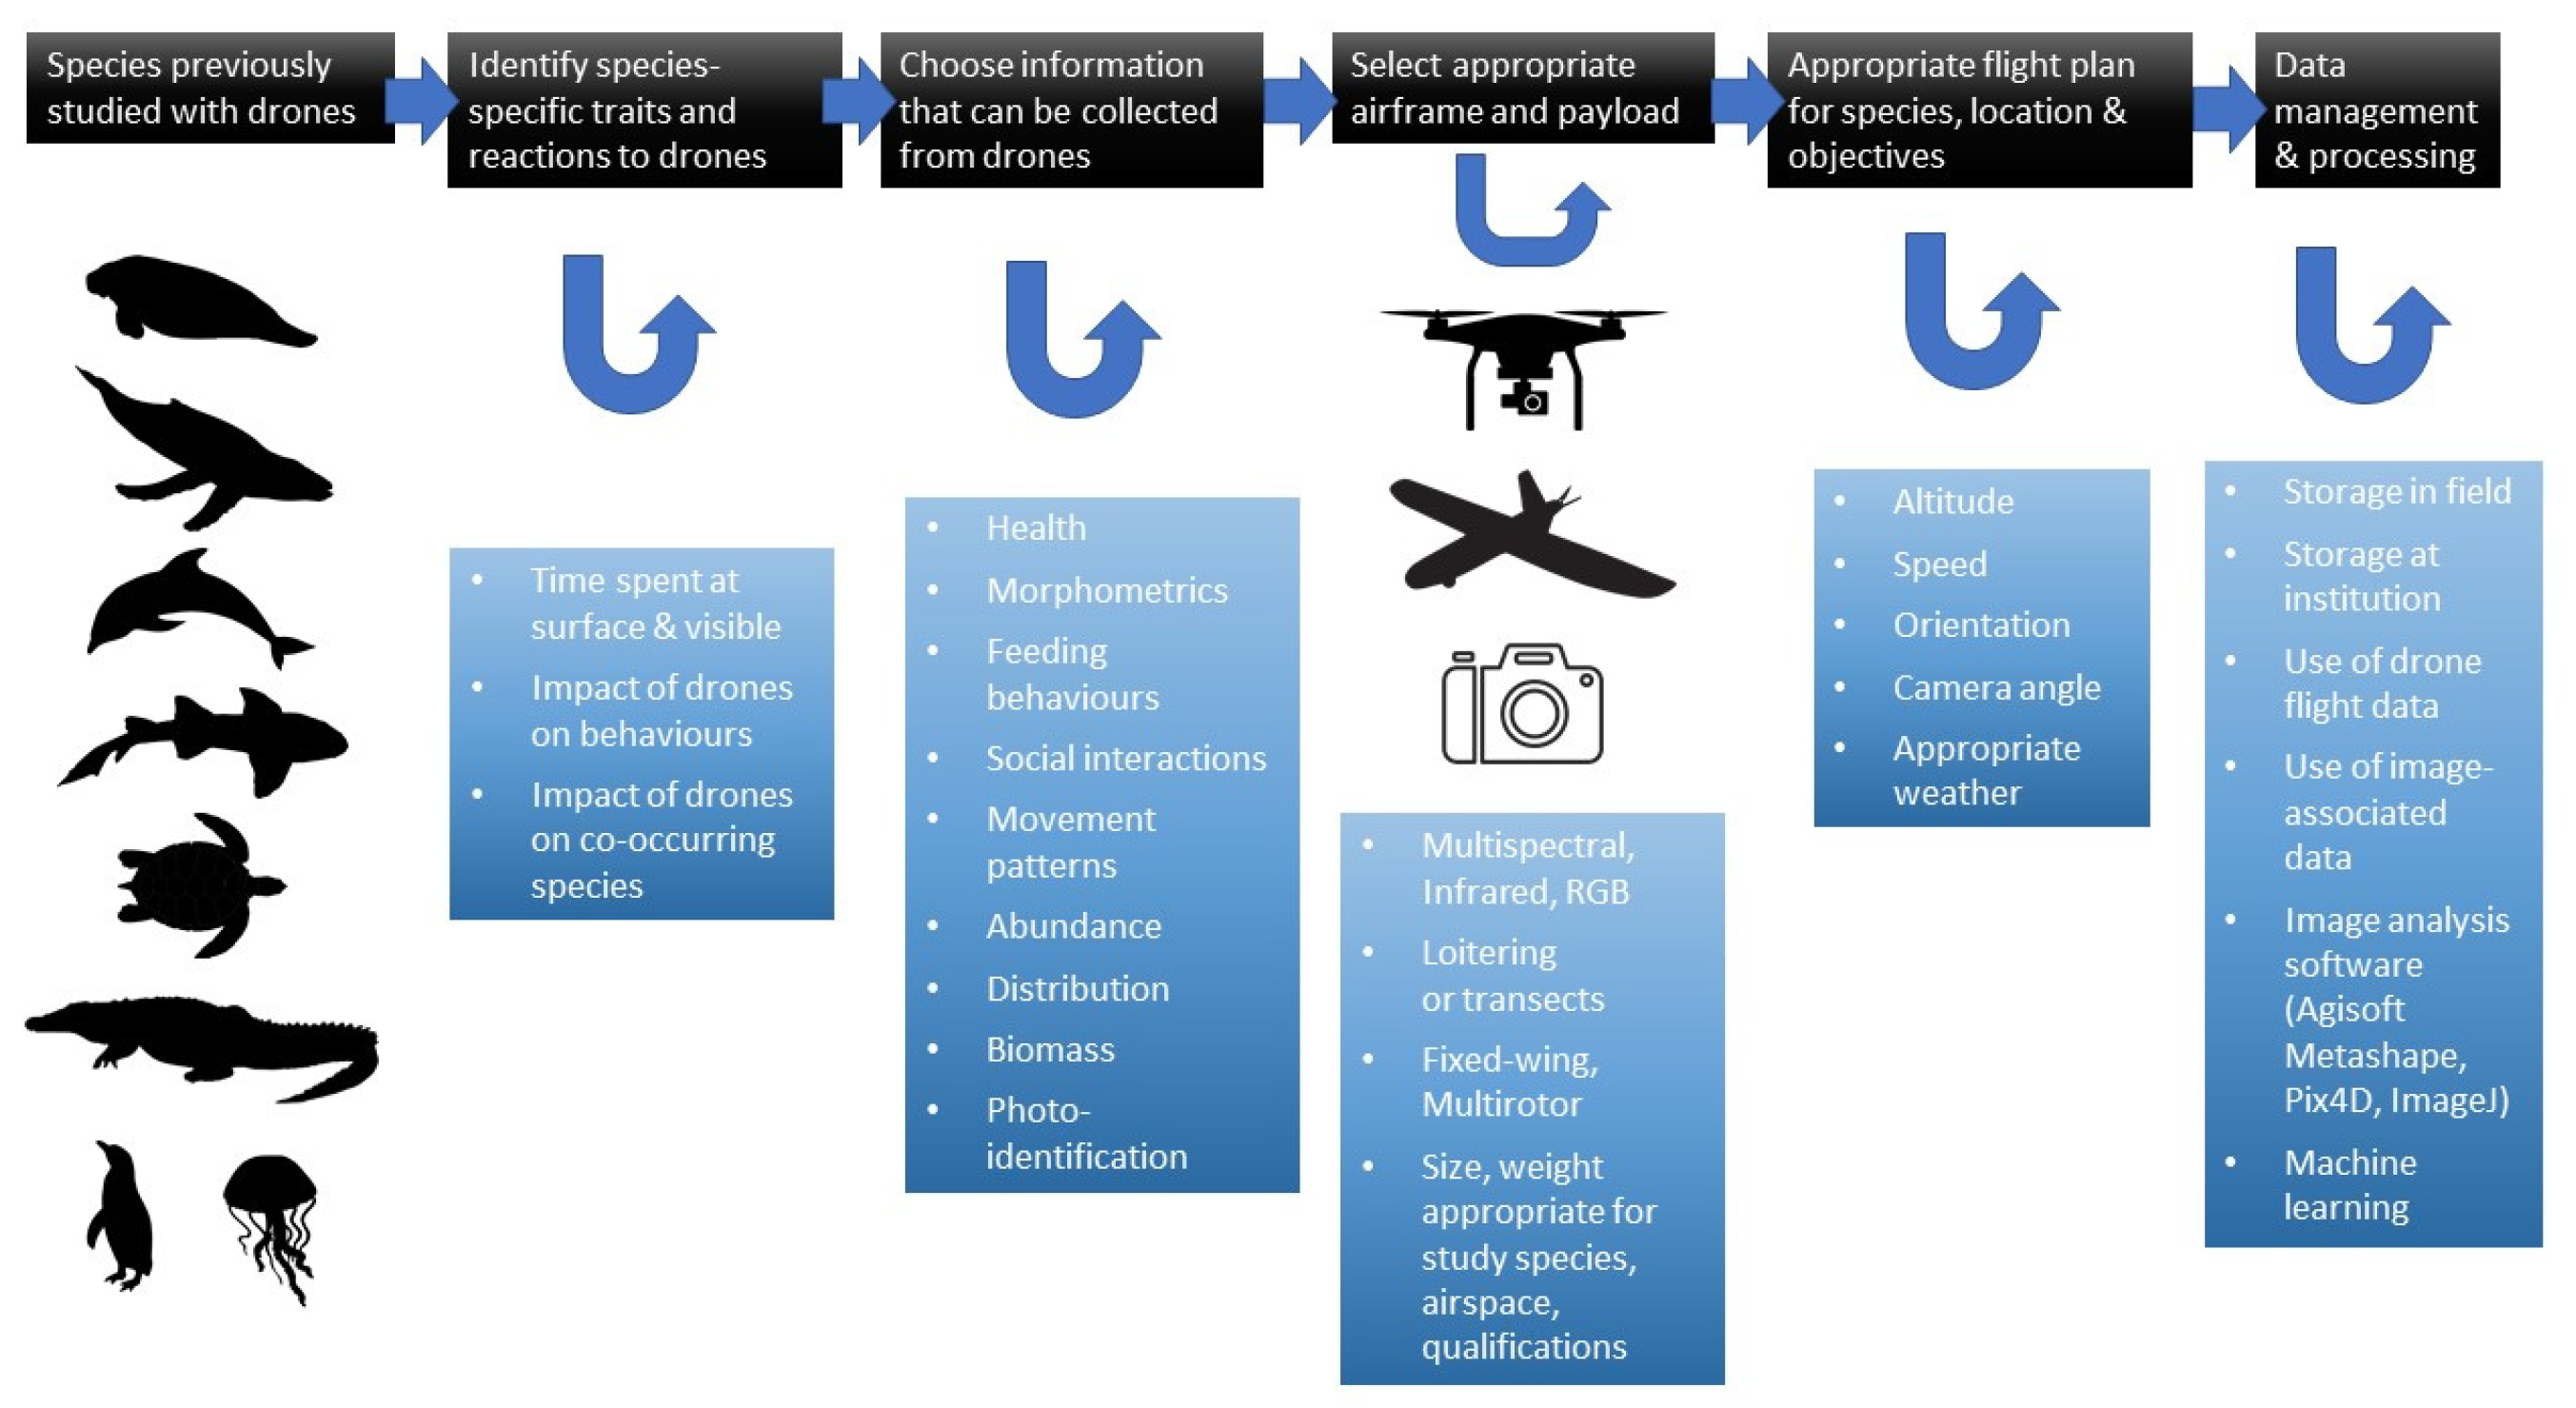 Drones Free Full-Text Operational Protocols for the Use of Drones in Marine Animal Research